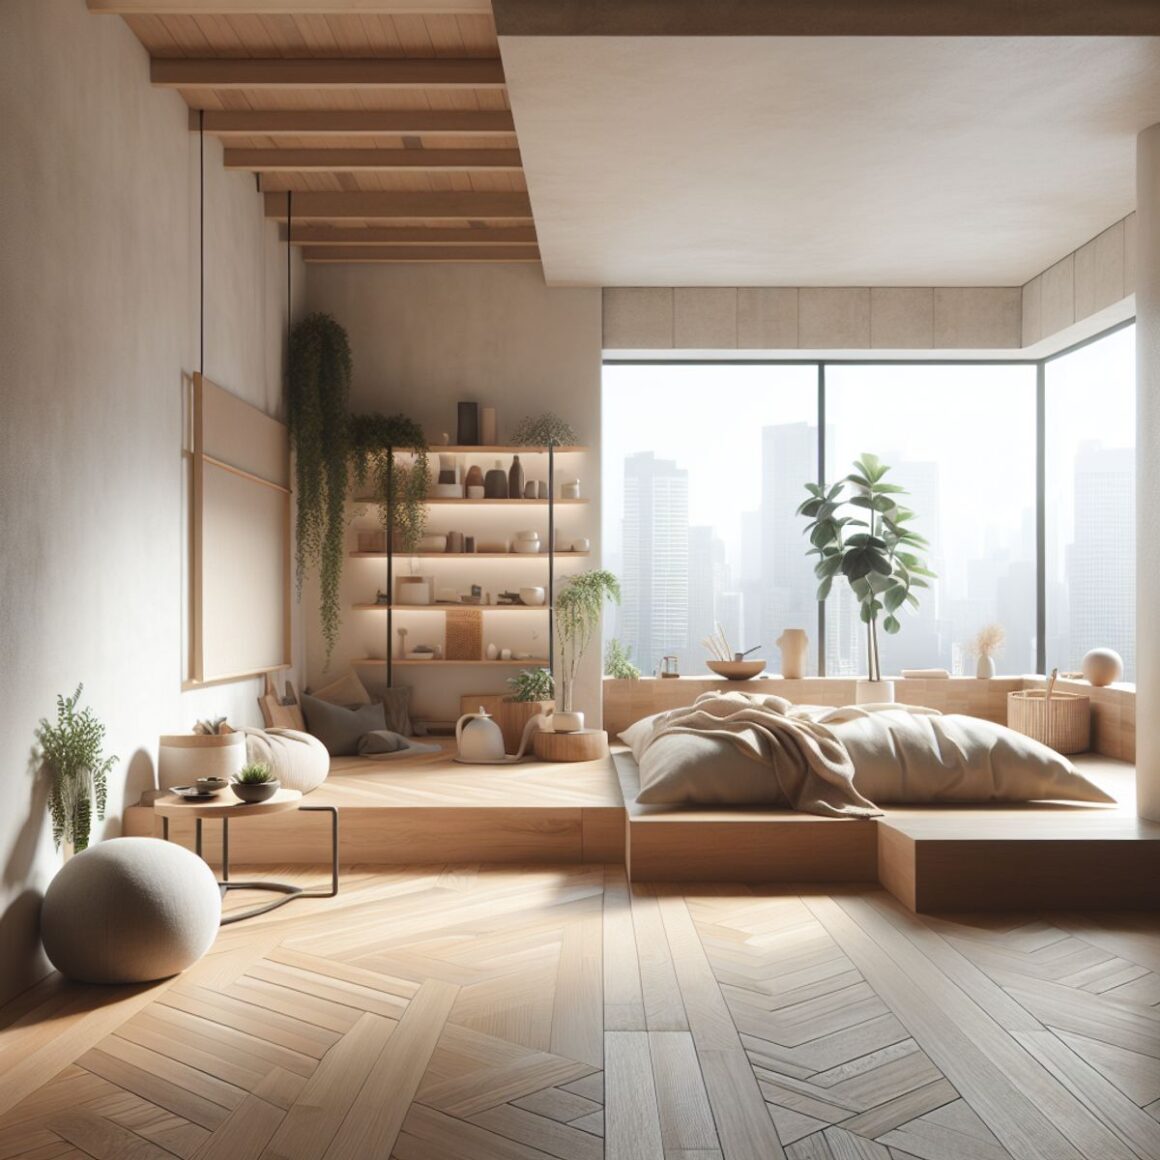 A small studio apartment with clean lines, natural materials, and a minimalist design aesthetic. The space features wood and stone elements, soft lighting, and an overall sense of tranquility.